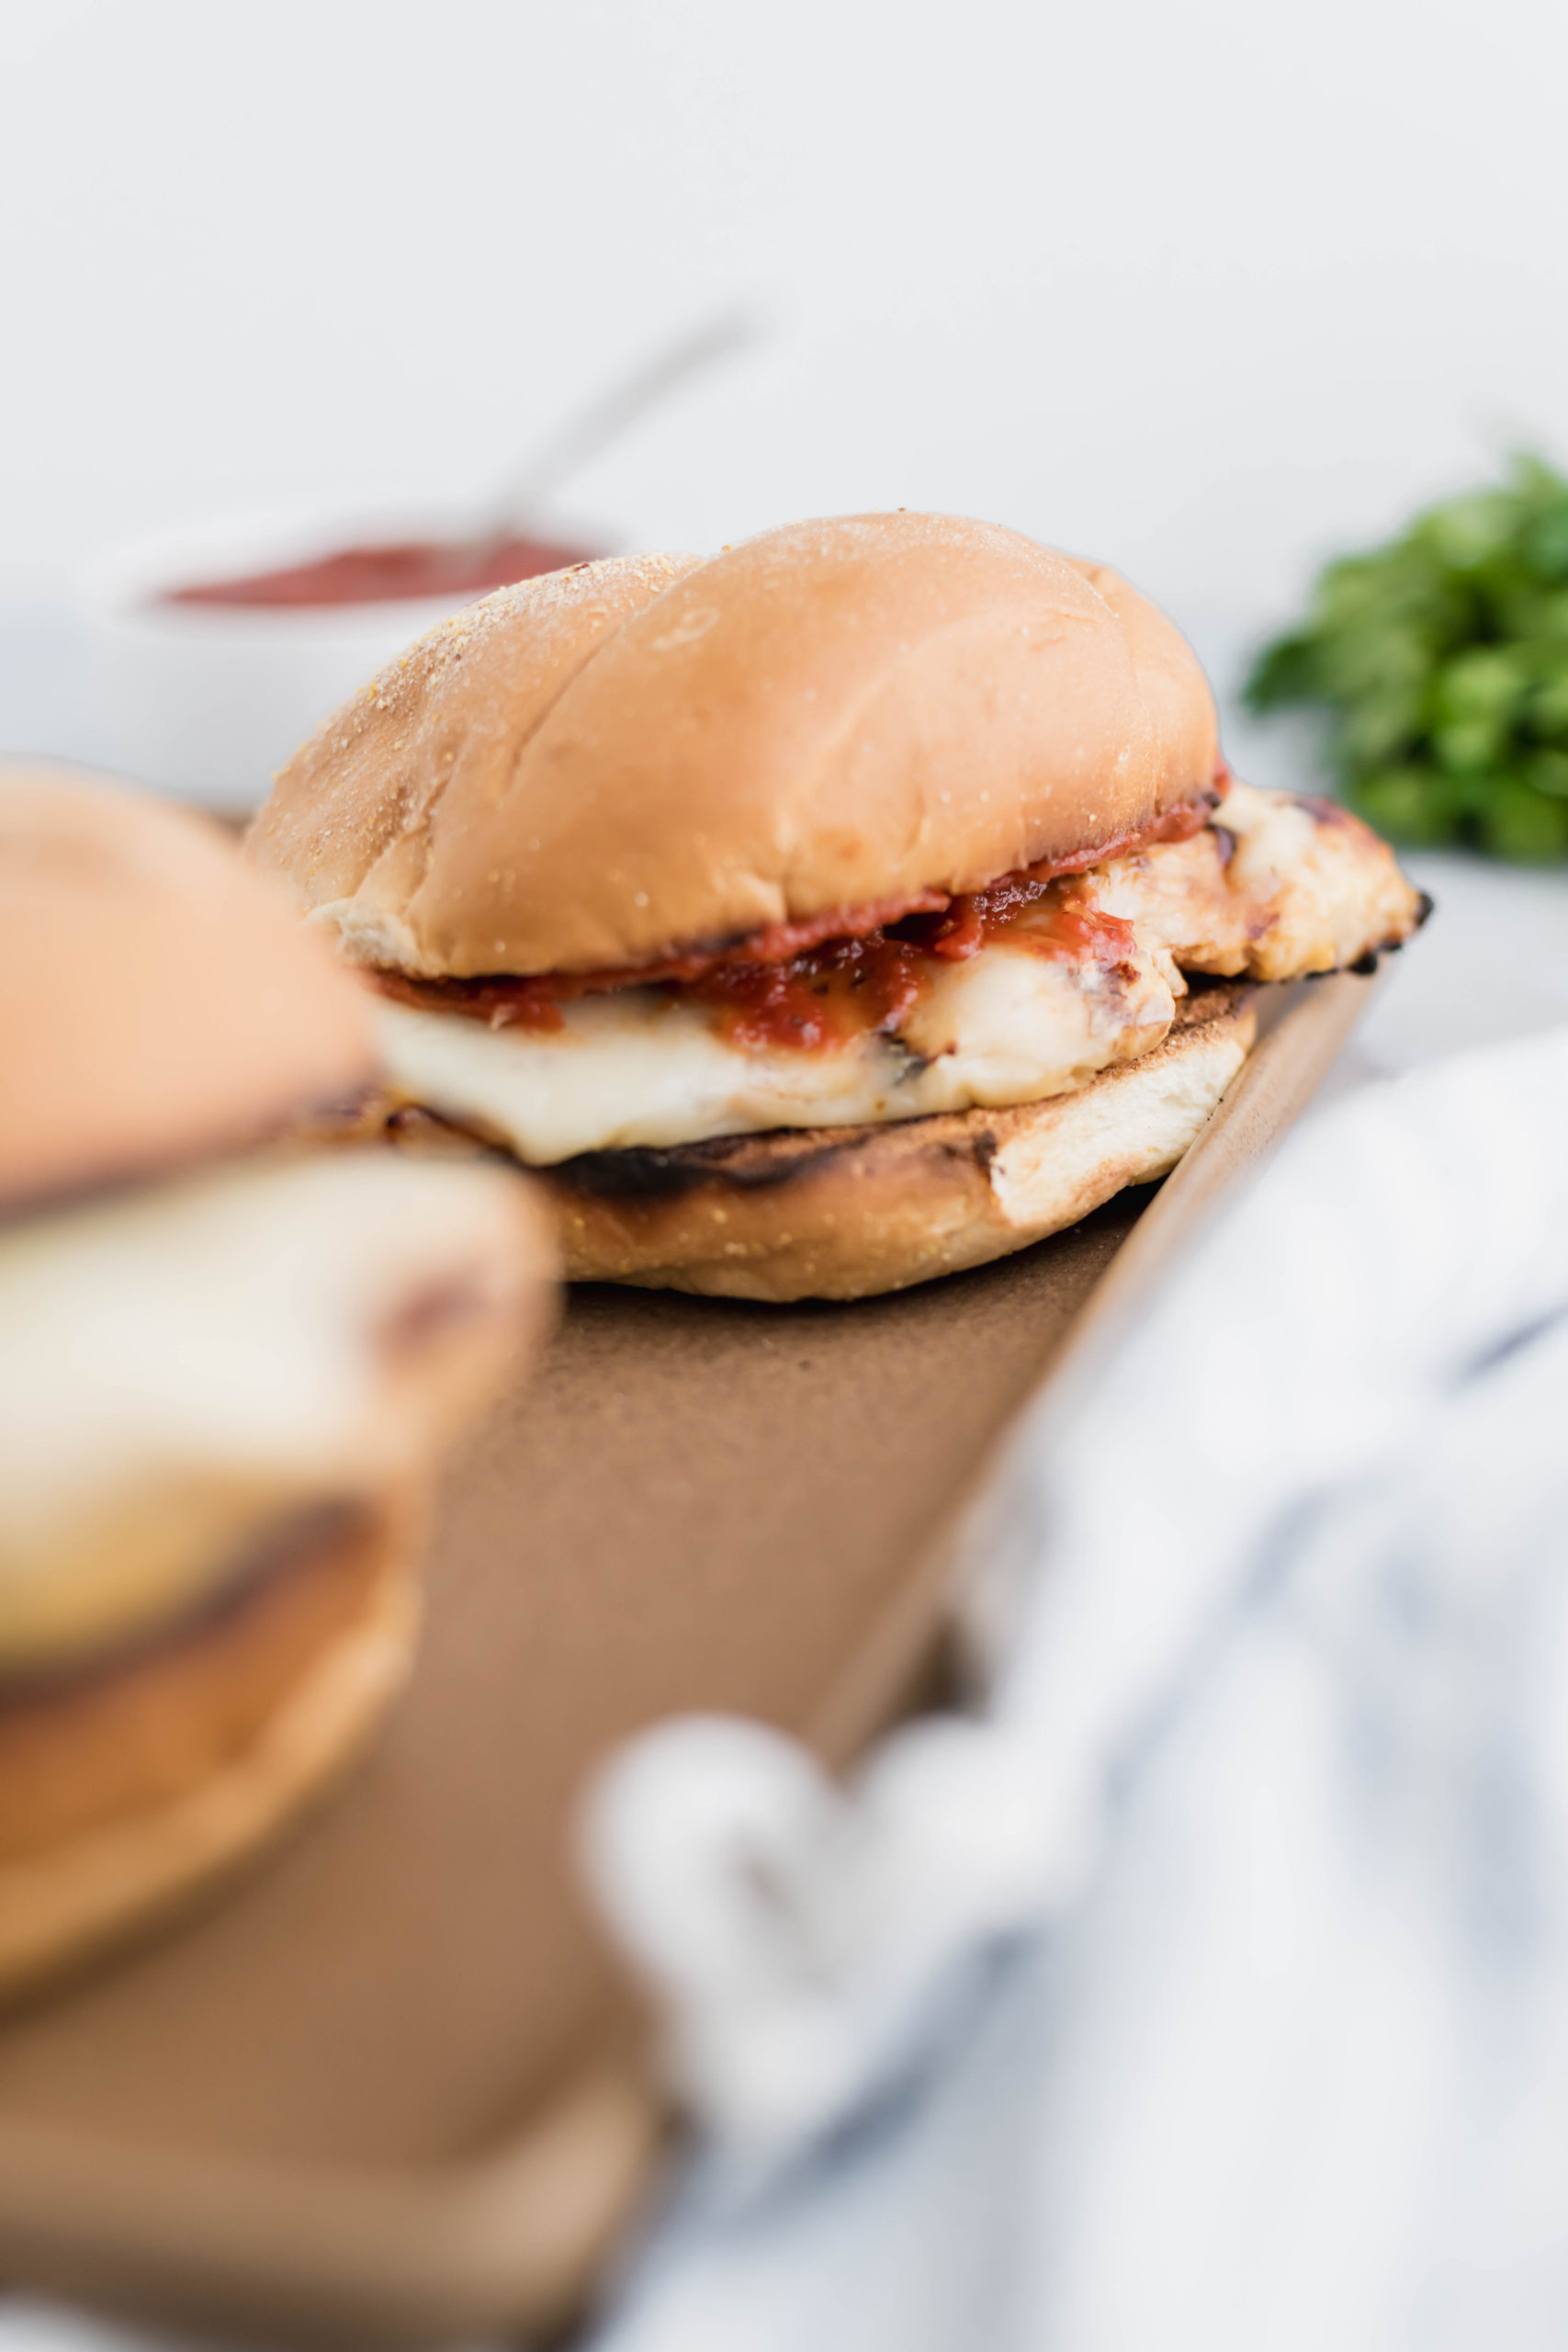 Easy, delicious and perfect for summer, this Grilled Chicken Parmesan Sandwich will quickly become a weeknight favorite. Grab 5 simple ingredients and get dinner on the table fast.